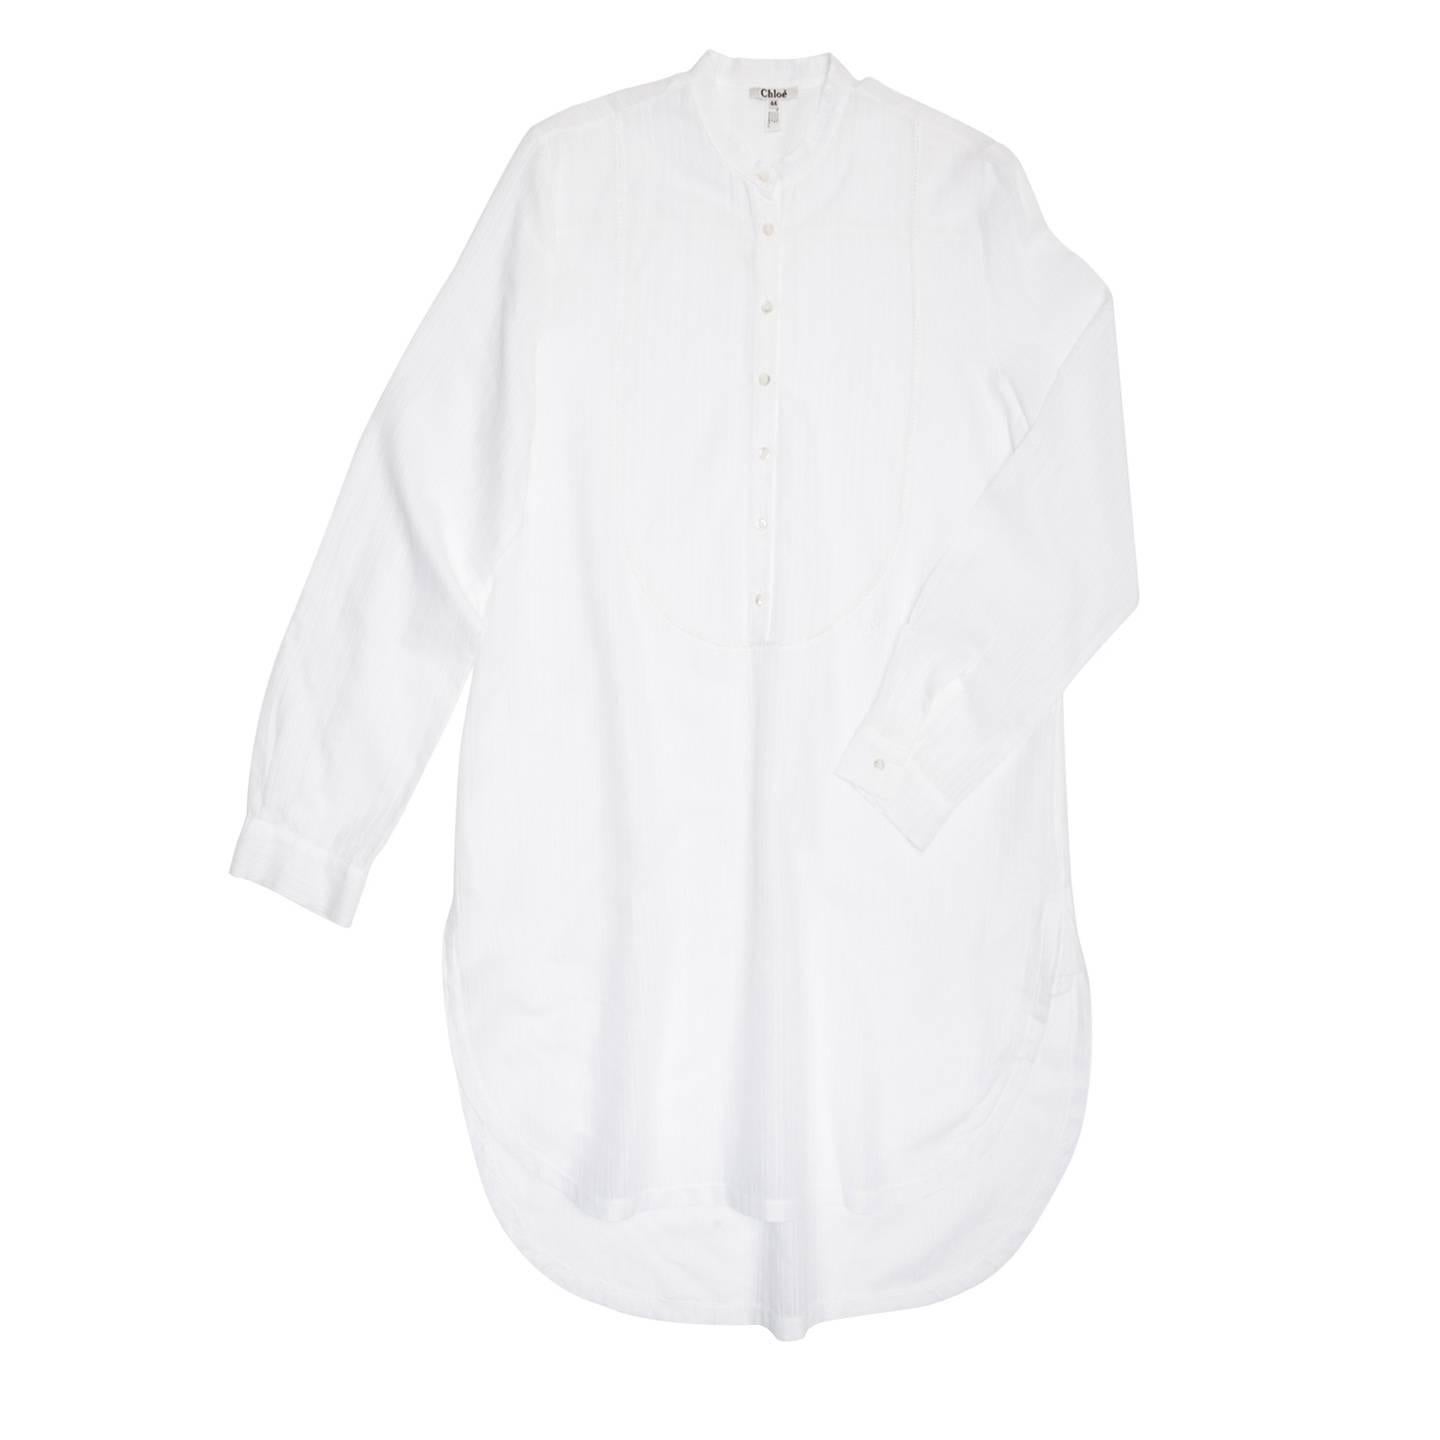 Beautiful white stripy jacquard tunic style shirt dress with Nehru collar and bib front designed by a small beautiful trim that enriches the back yoke as well. The hem is round with detailed vents at side seams and the back is longer than the front.